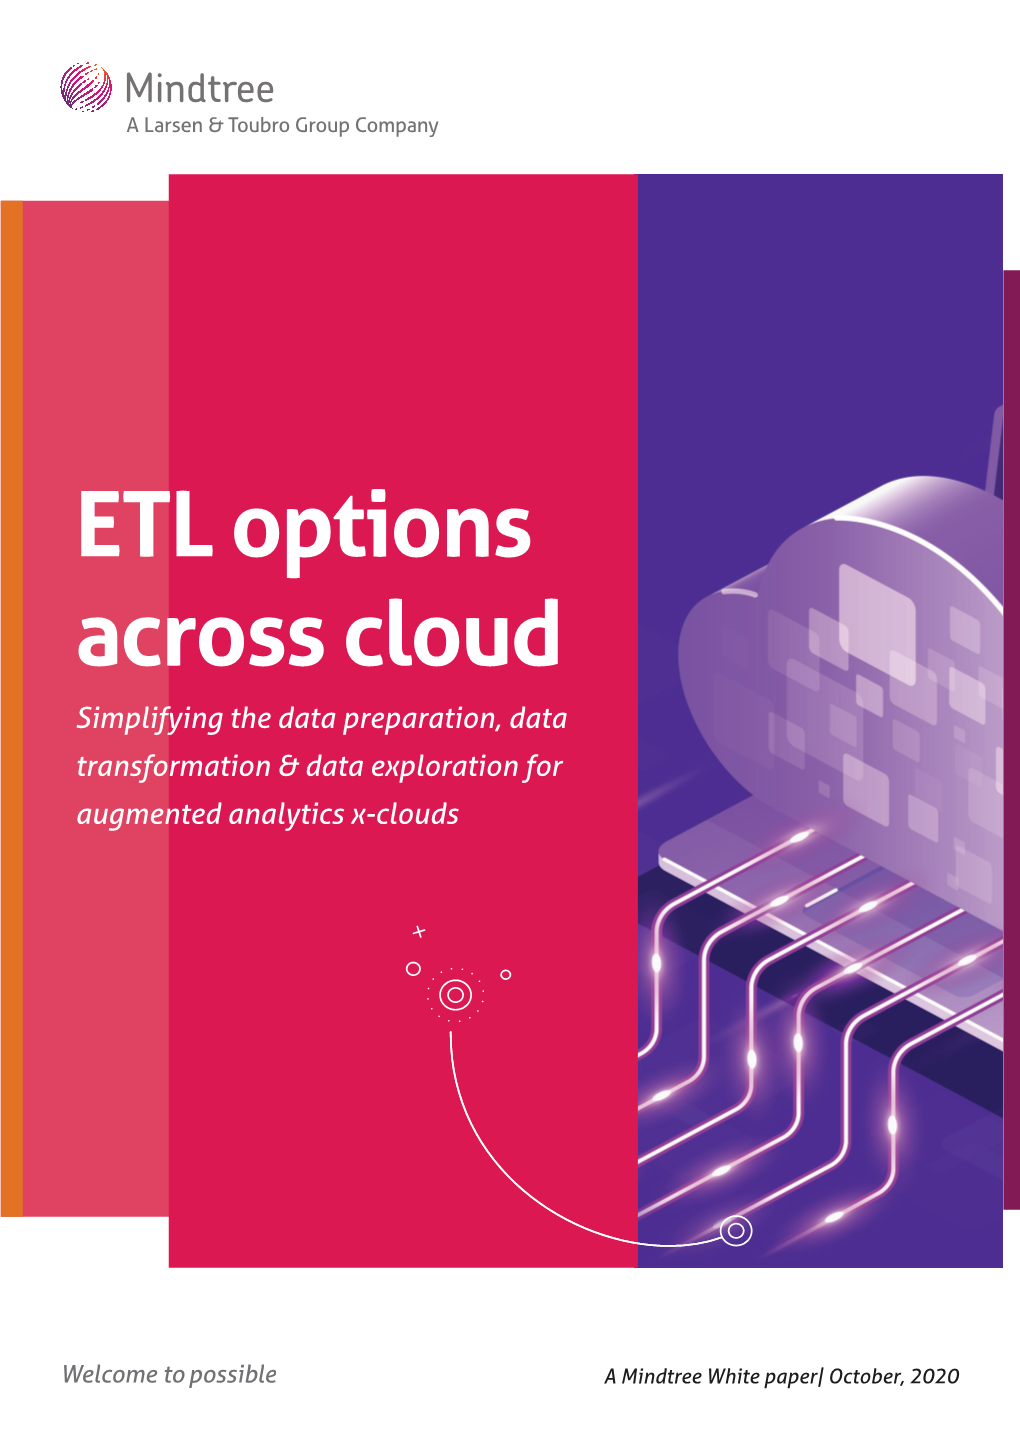 ETL Options Across Cloud Simplifying the Data Preparation, Data Transformation & Data Exploration for Augmented Analytics X-Clouds